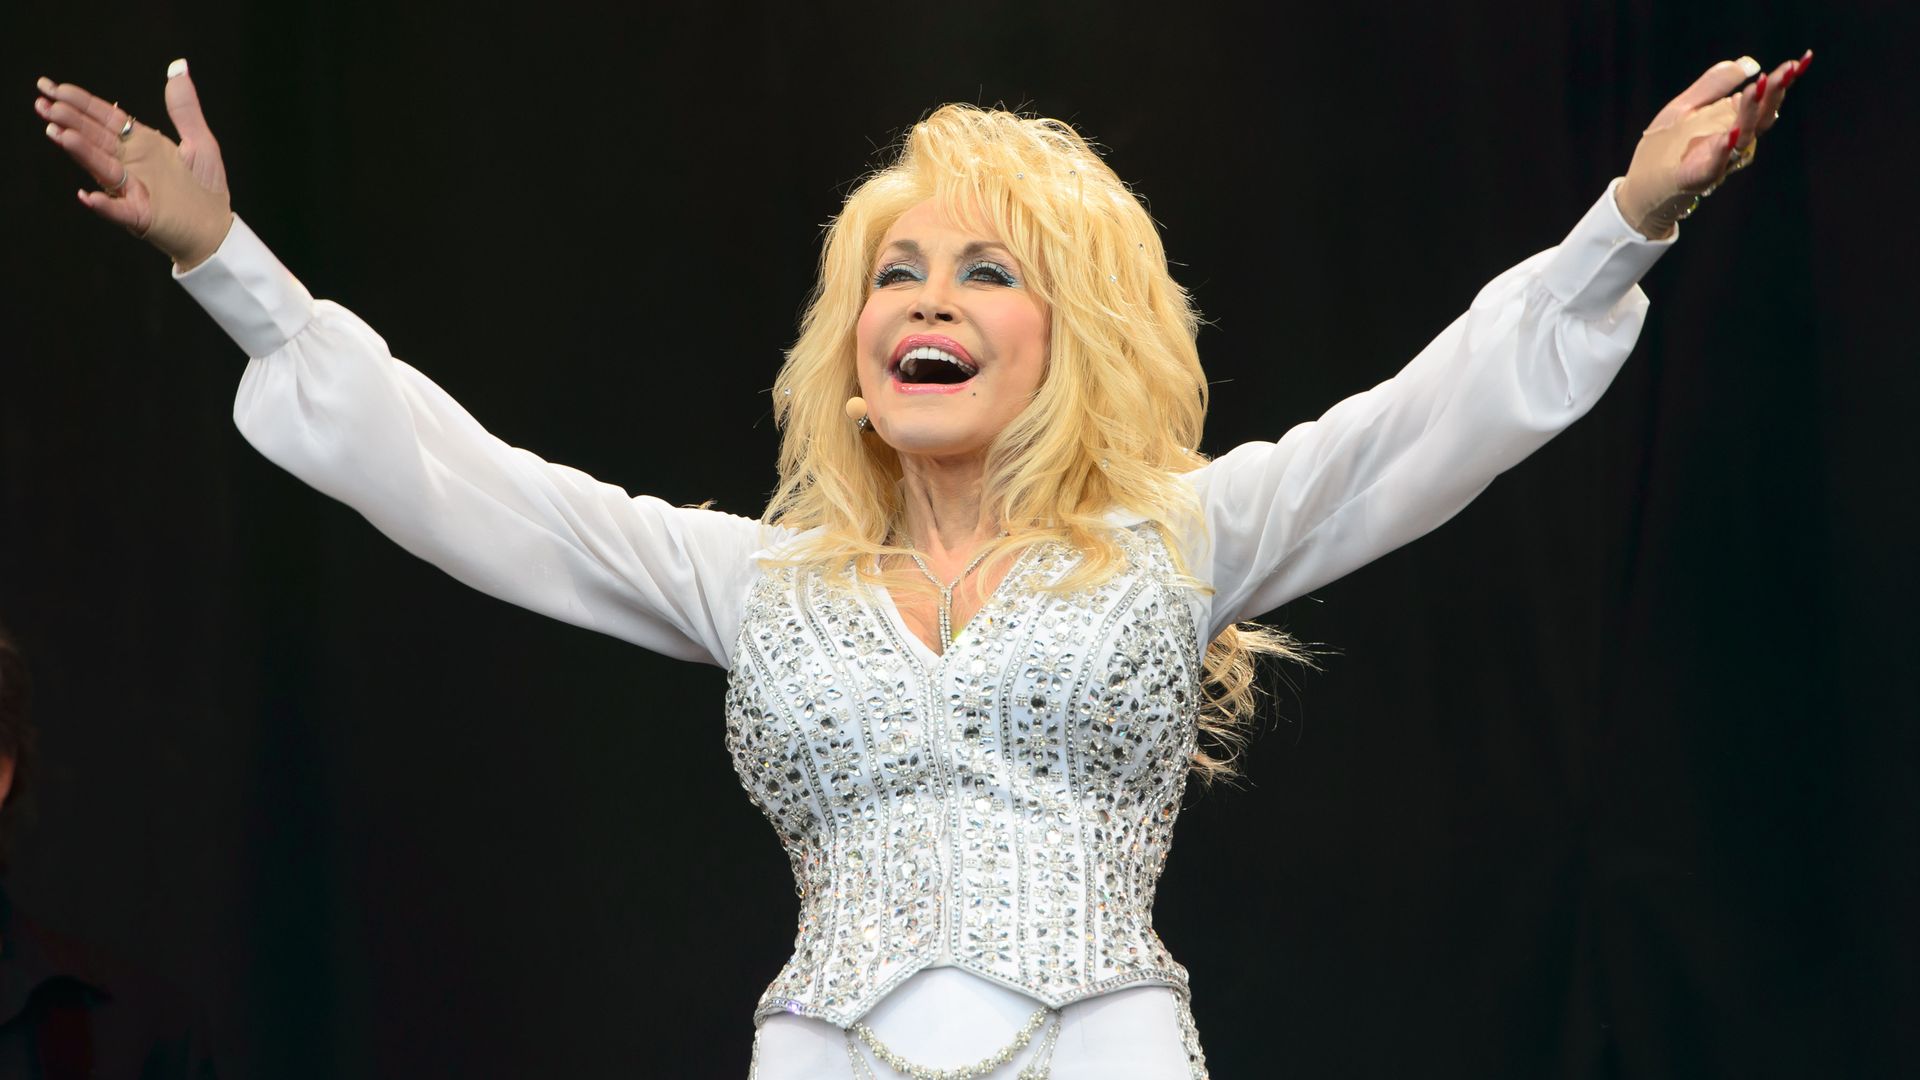 Dolly Parton on stage with her arms stretched out.